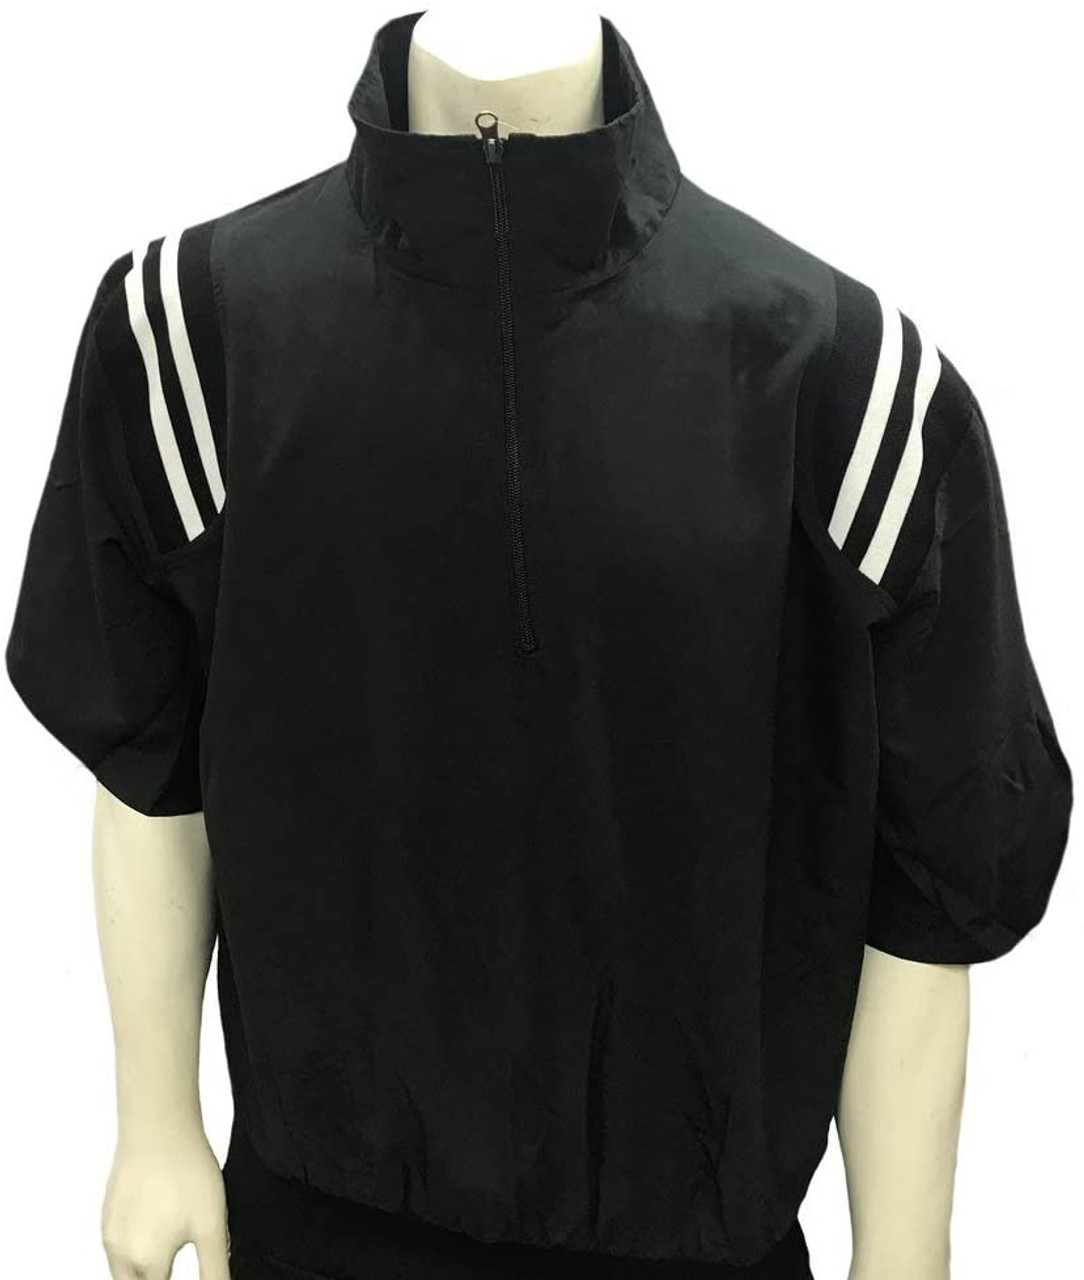 1/2 Sleeve Umpire Jacket with Shoulder Insets - Get Official Products